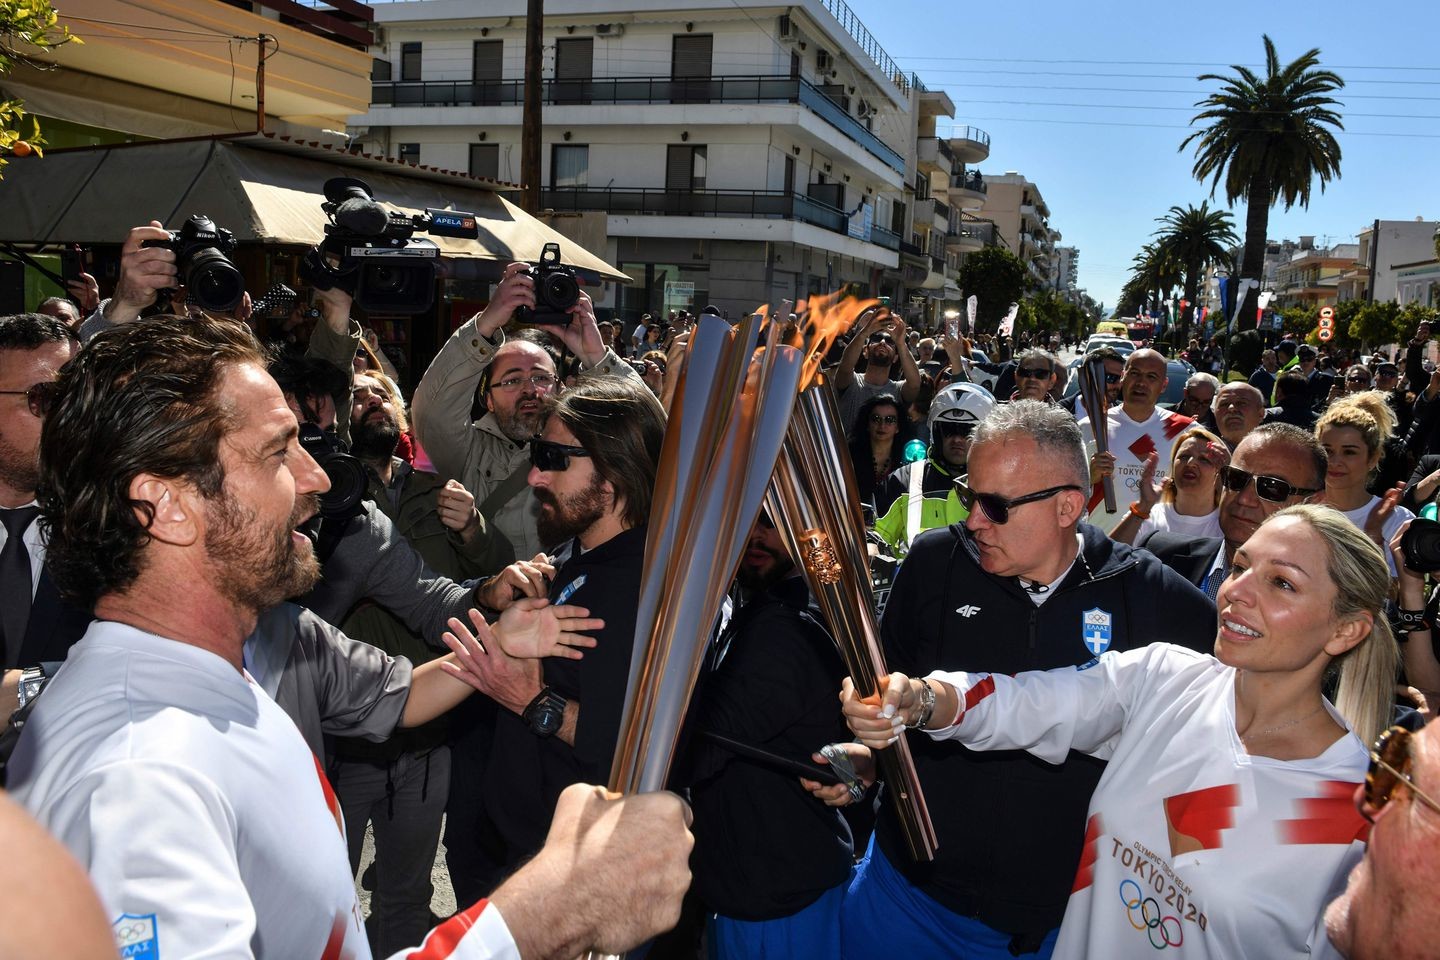 One day after flame was lit, Greece suspends Olympic torch relay because of coronavirus